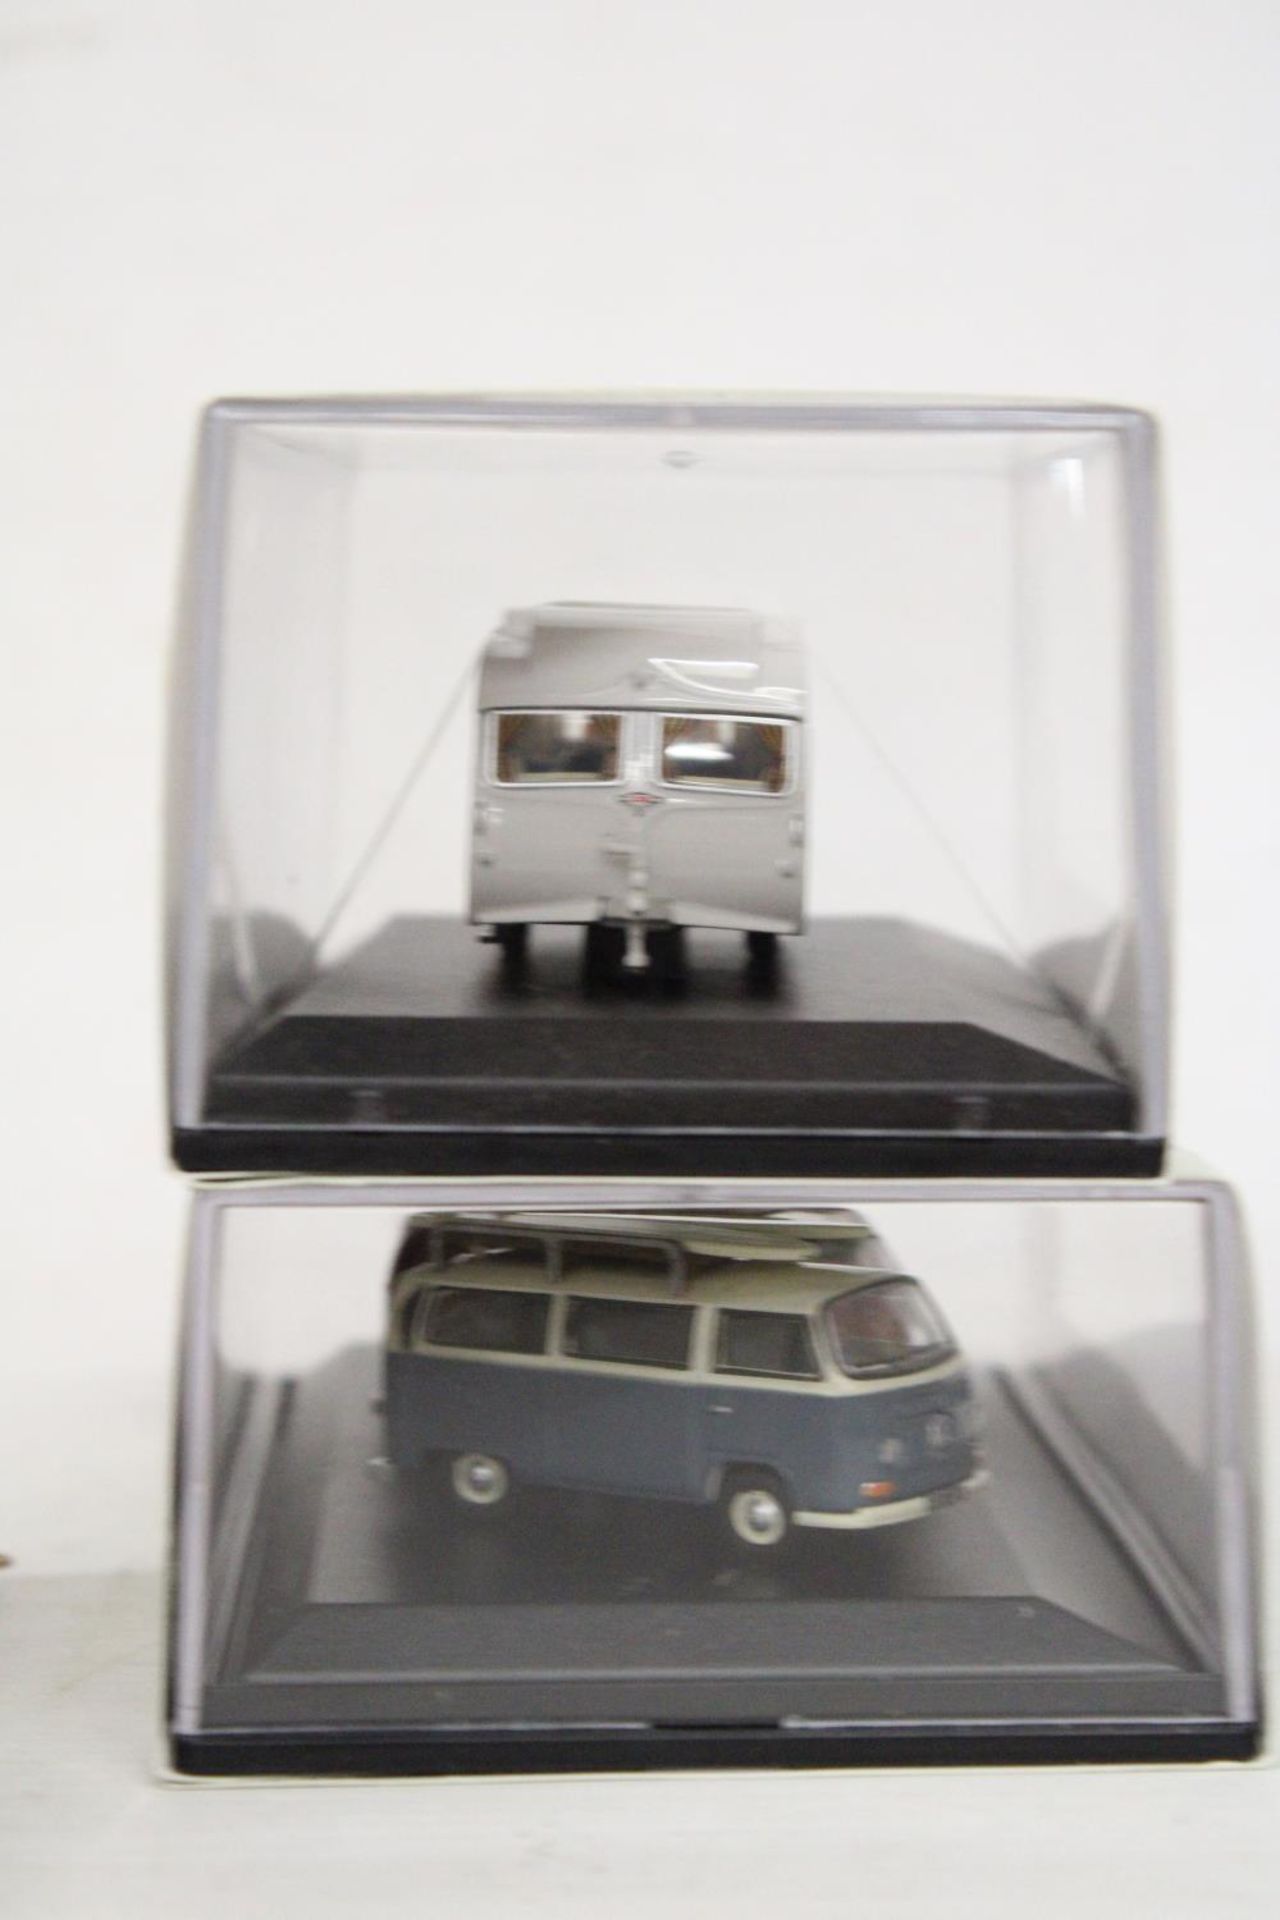 FOUR AS NEW AND BOXED OXFORD COMMERCIAL VEHICLE SETS - Image 4 of 5